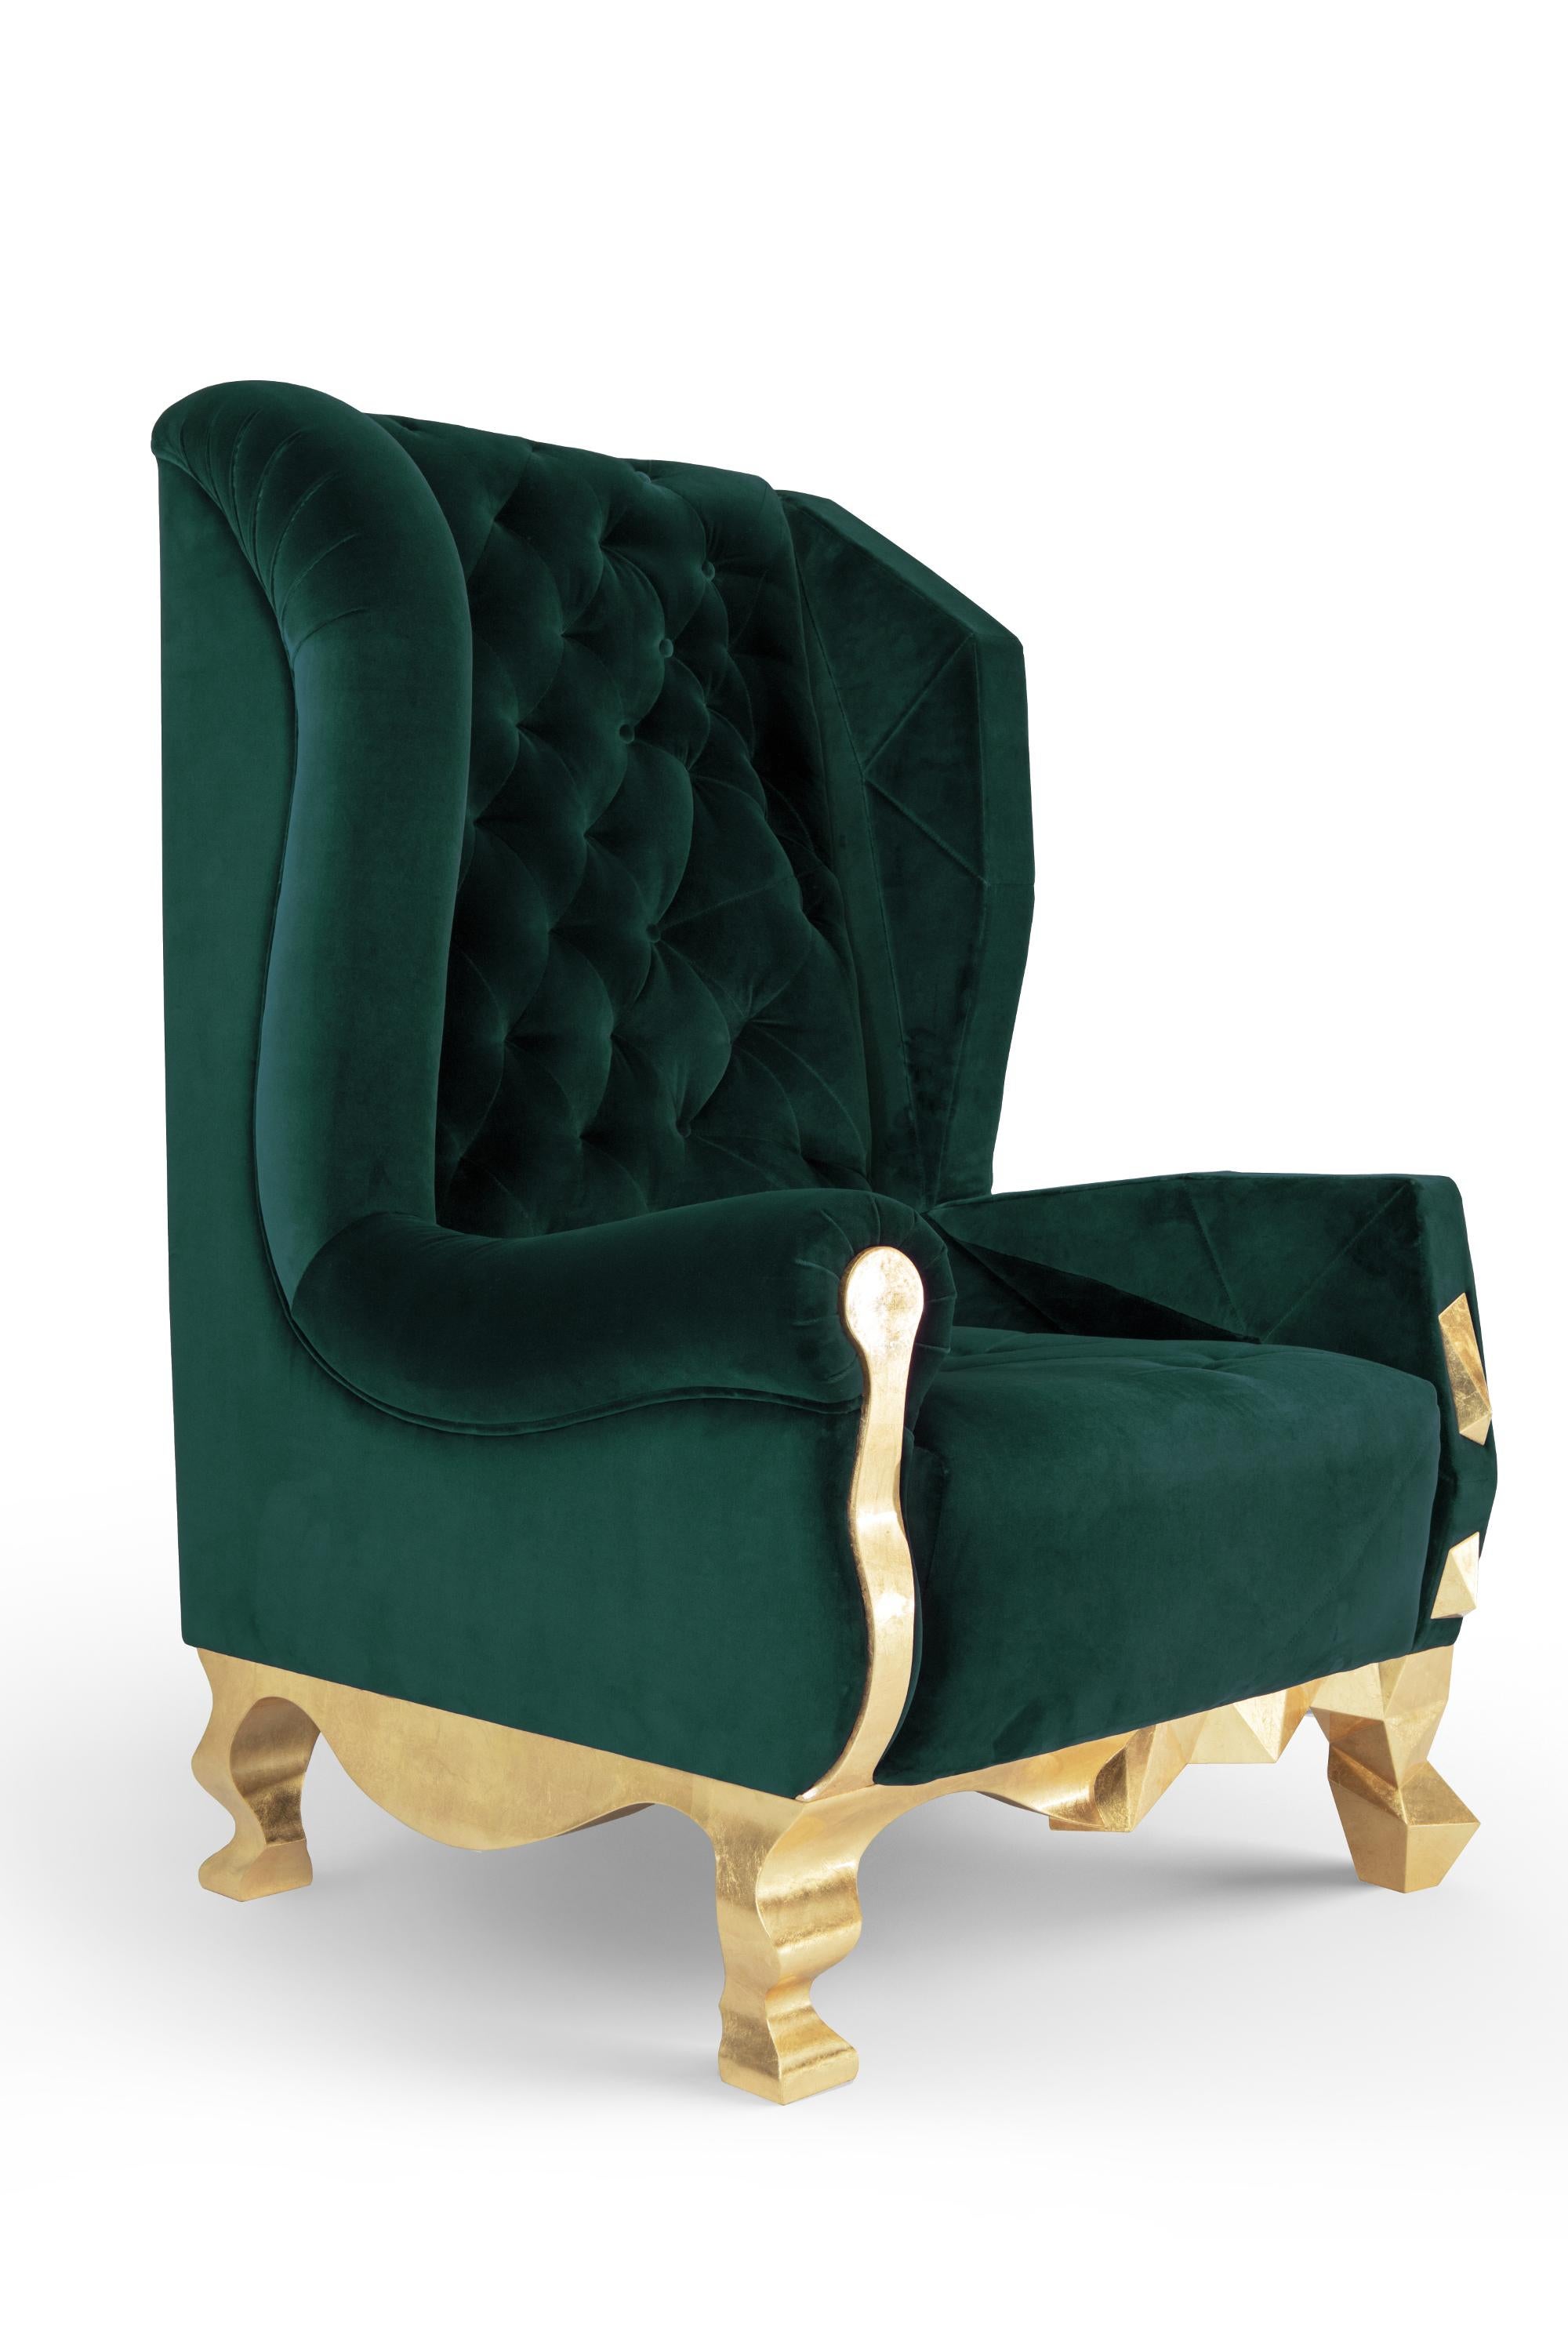 Deep green rockchair by Royal Stranger
Dimensions: Width 98cm, height 135cm, depth 99cm
Different upholstery colors and finishes are available. Brass, copper or stainless steel in polished or brushed finish.
Materials: velvet on the top of the